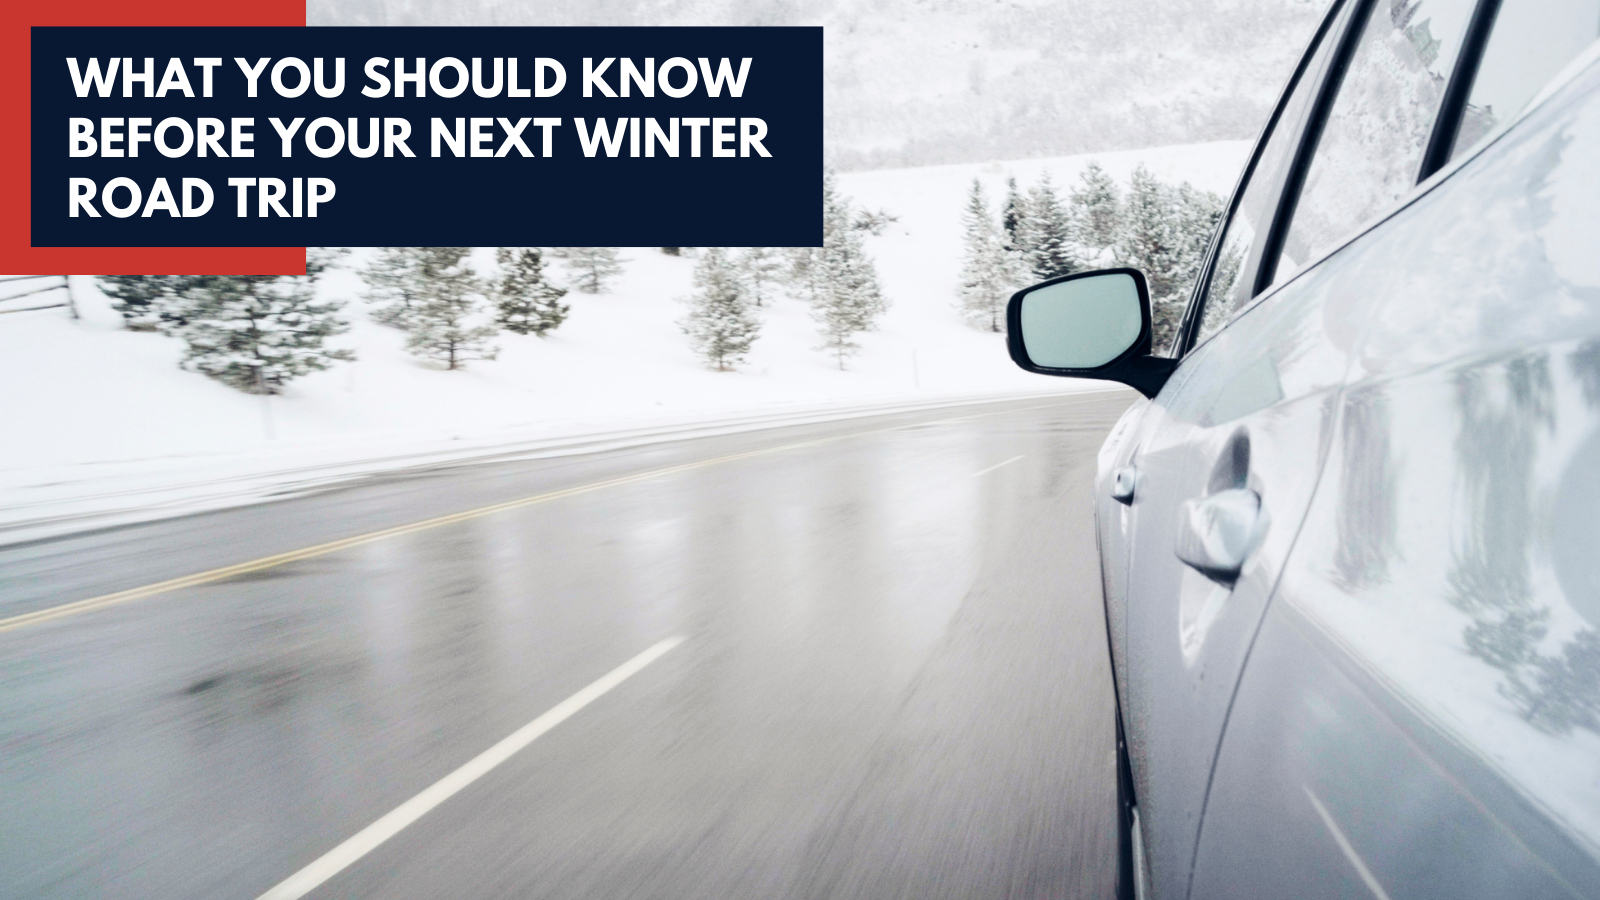 What You Should Know Before Your Next Winter Road Trip